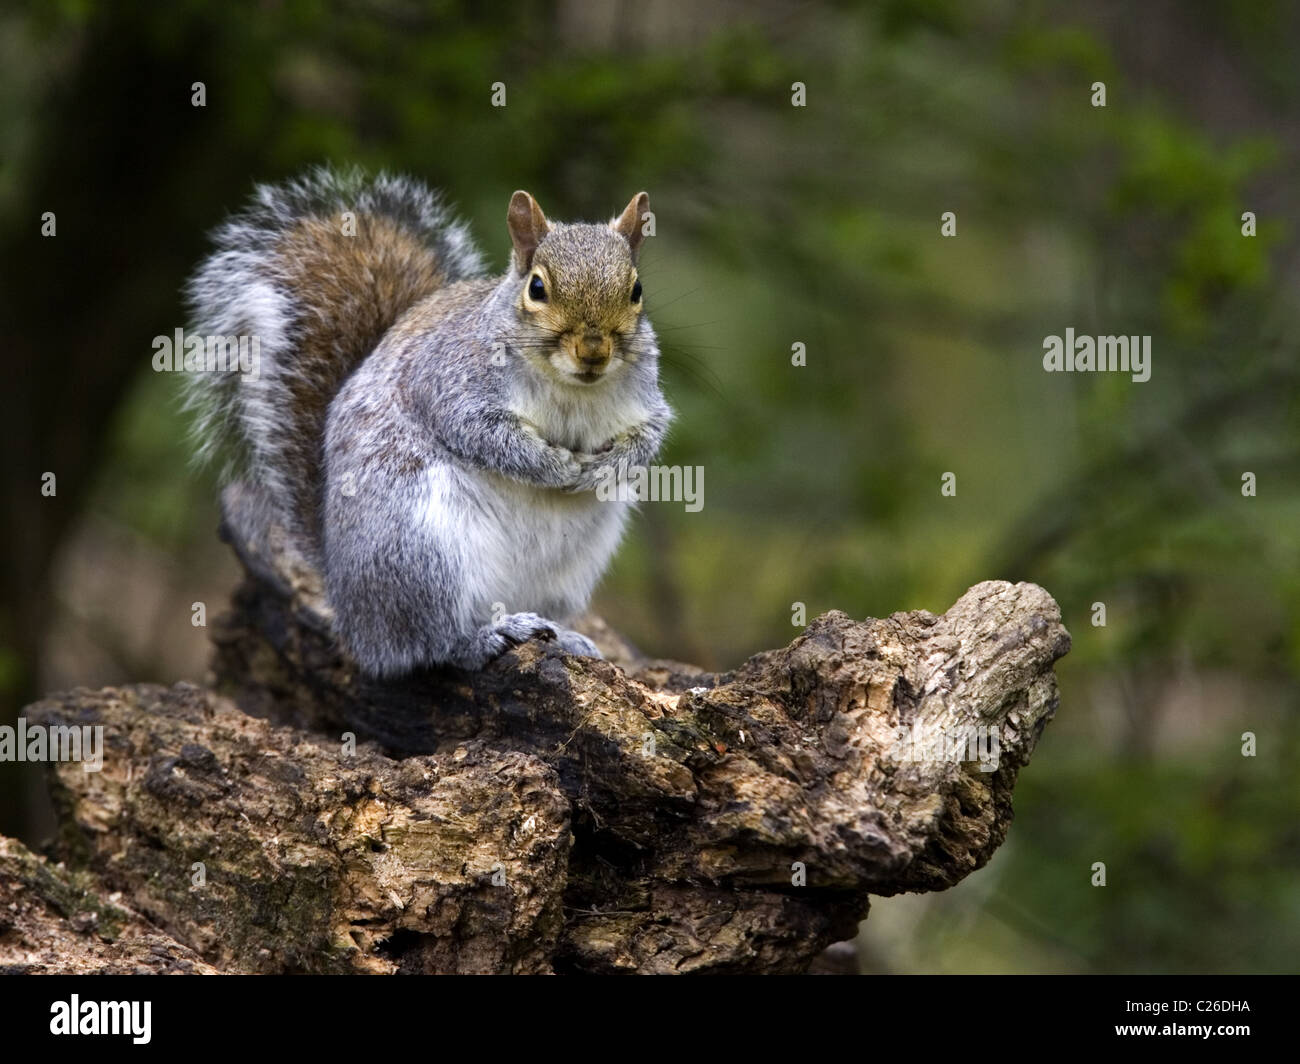 Grey squirrel with tail raised Stock Photo